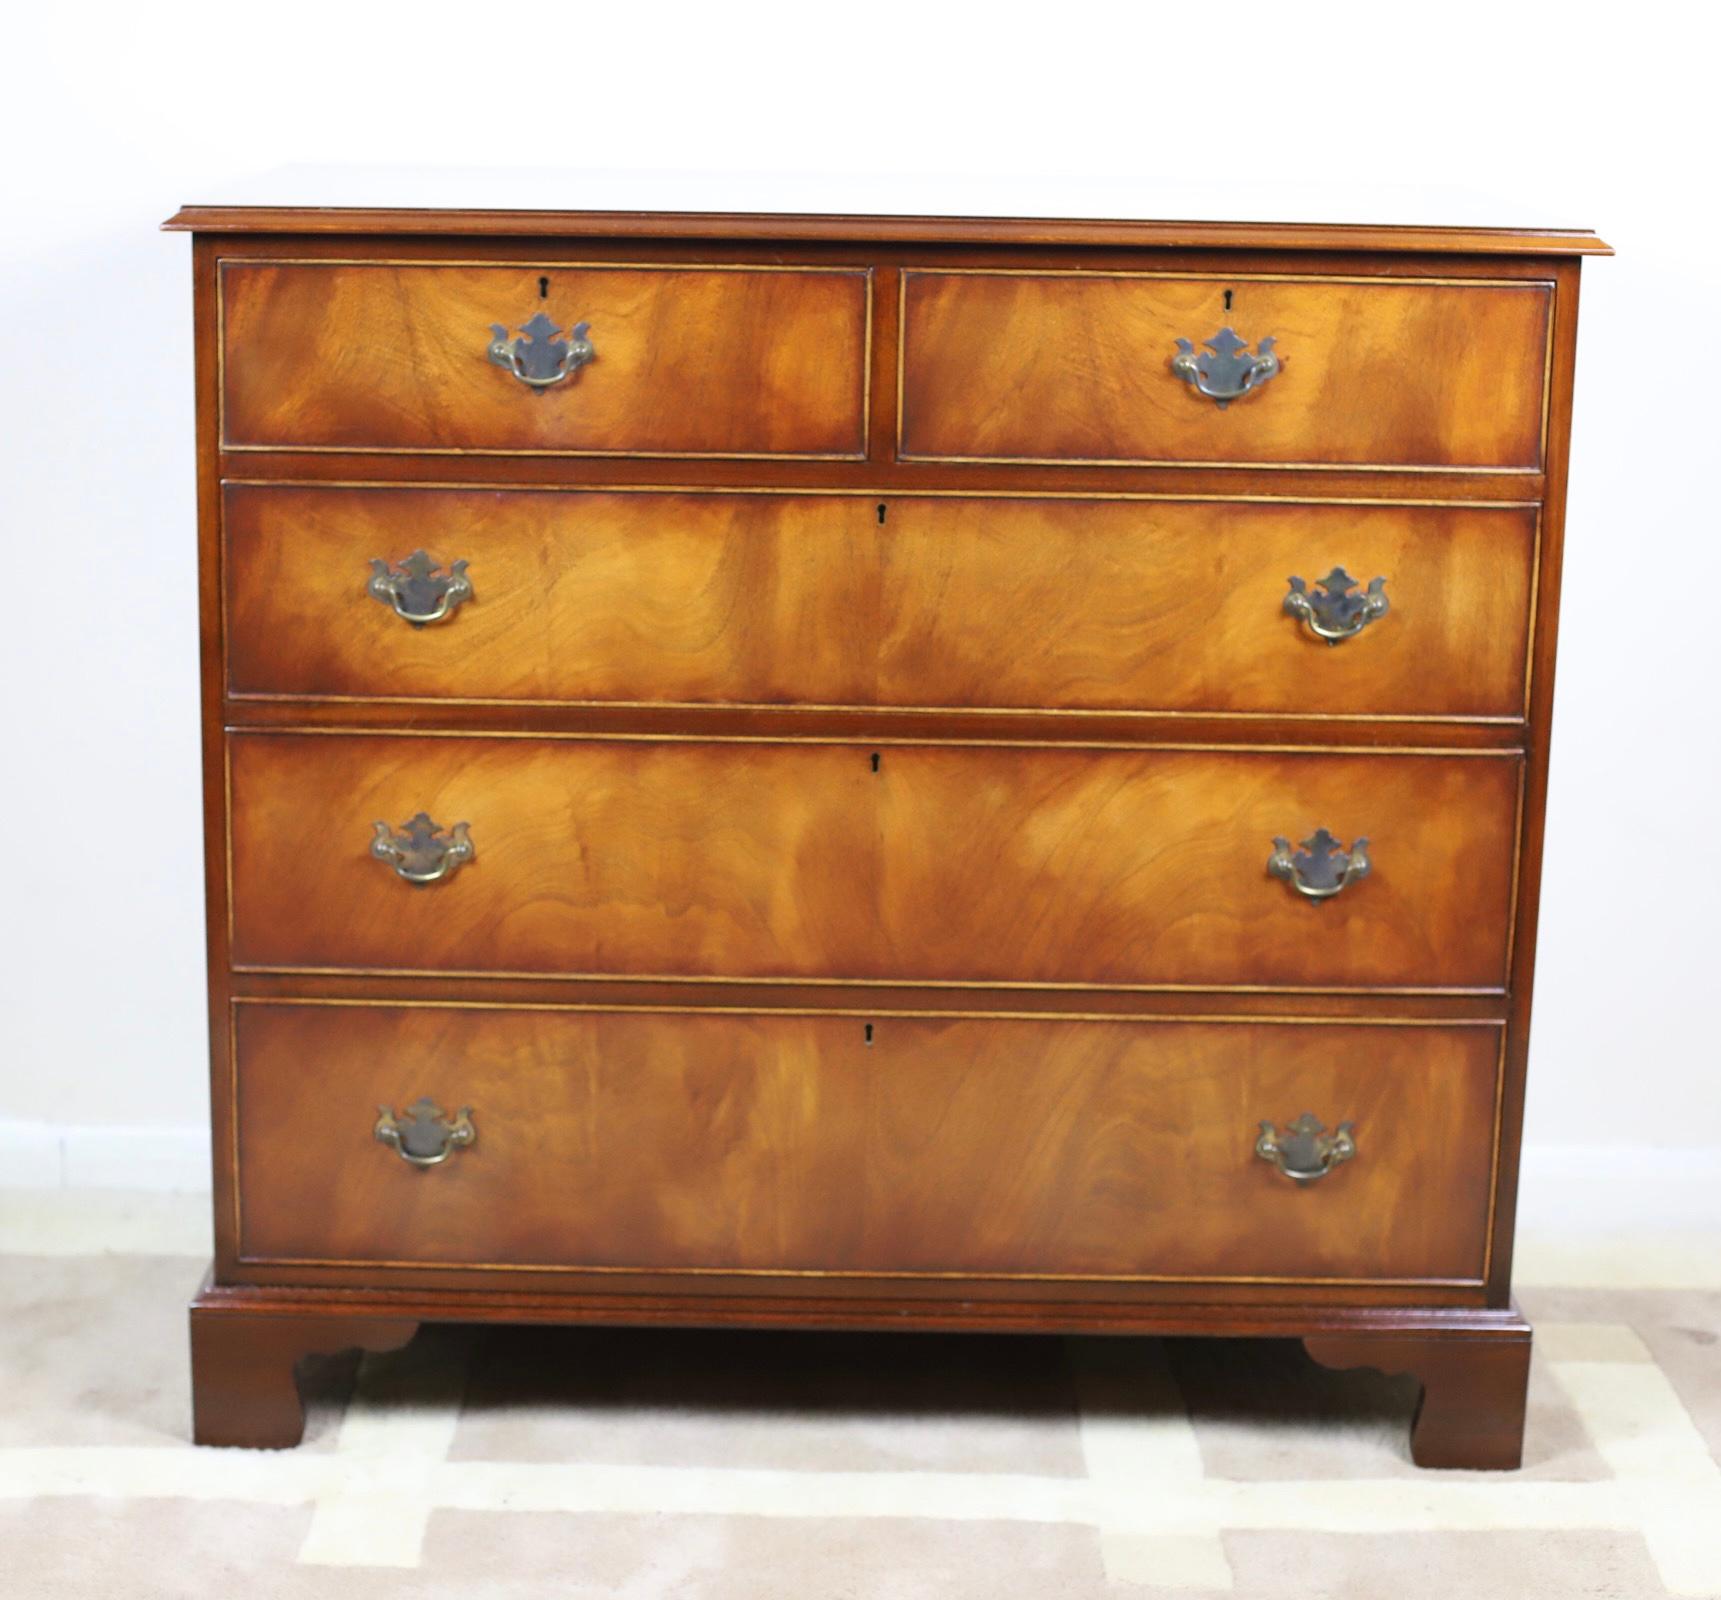 For sale a beautiful pair of late 20th century George Ill style
Bevan Funell Reprodux  chest of drawers.
Can be sold as pair or as a single one, the price for one is £1450 and £2800for the pair.
Don't hesitate to contact me if you have any